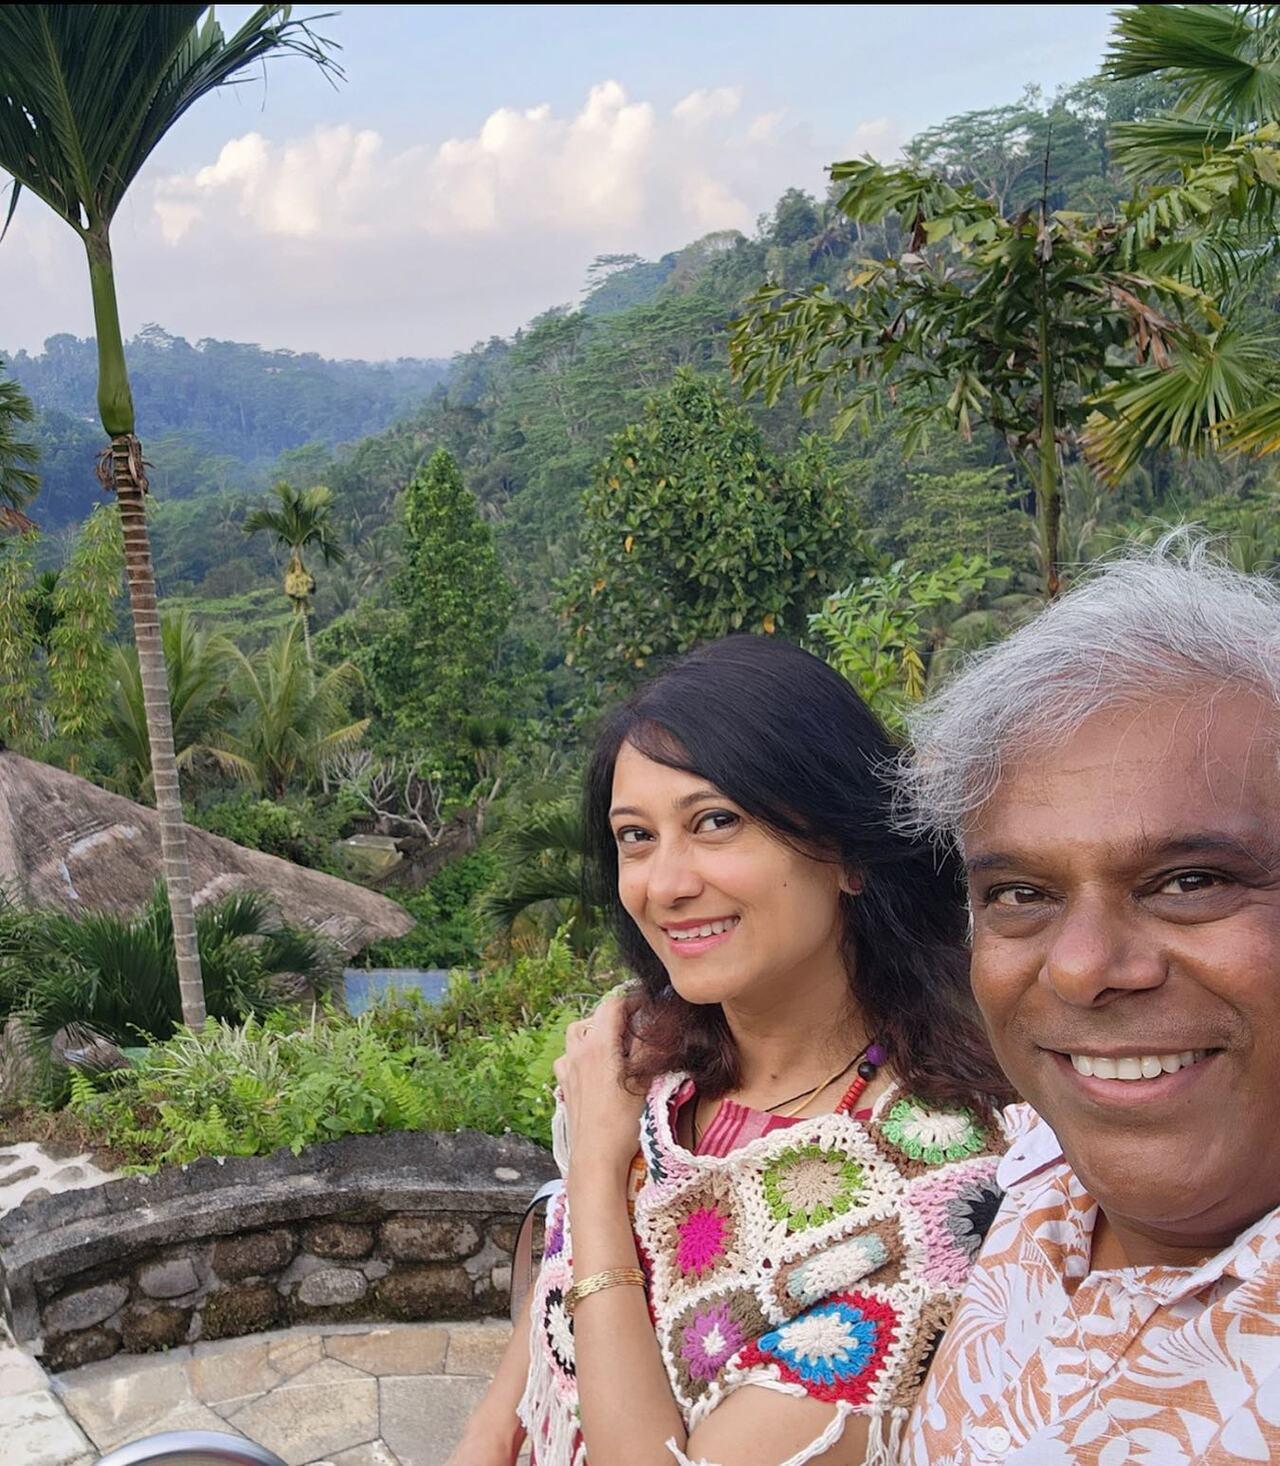 The selfie camera is Ashish Vidyarthi's favourite. He captures the wonders of the natural world (and his beloved ones) through his handy-dandy phone